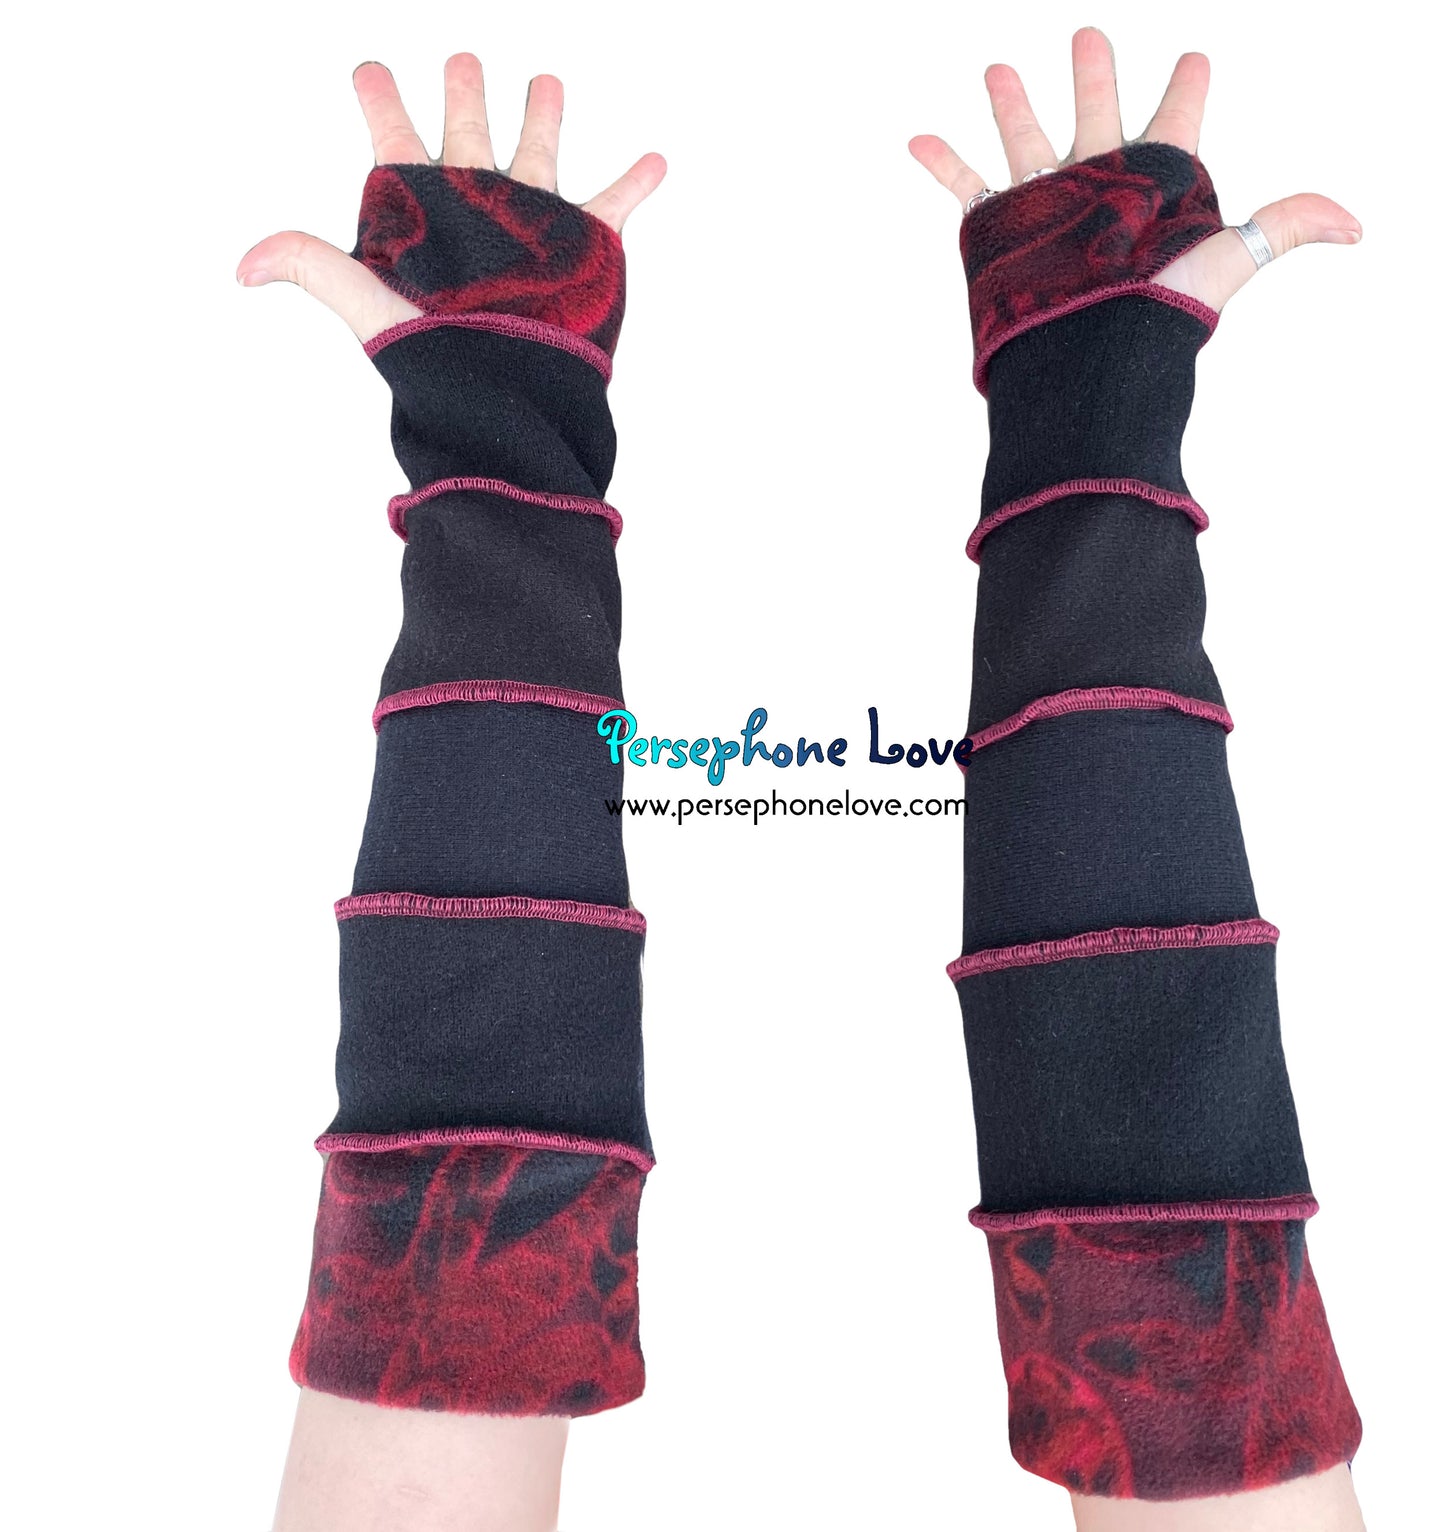 Katwise-inspired black felted 100% cashmere arm warmers-1632